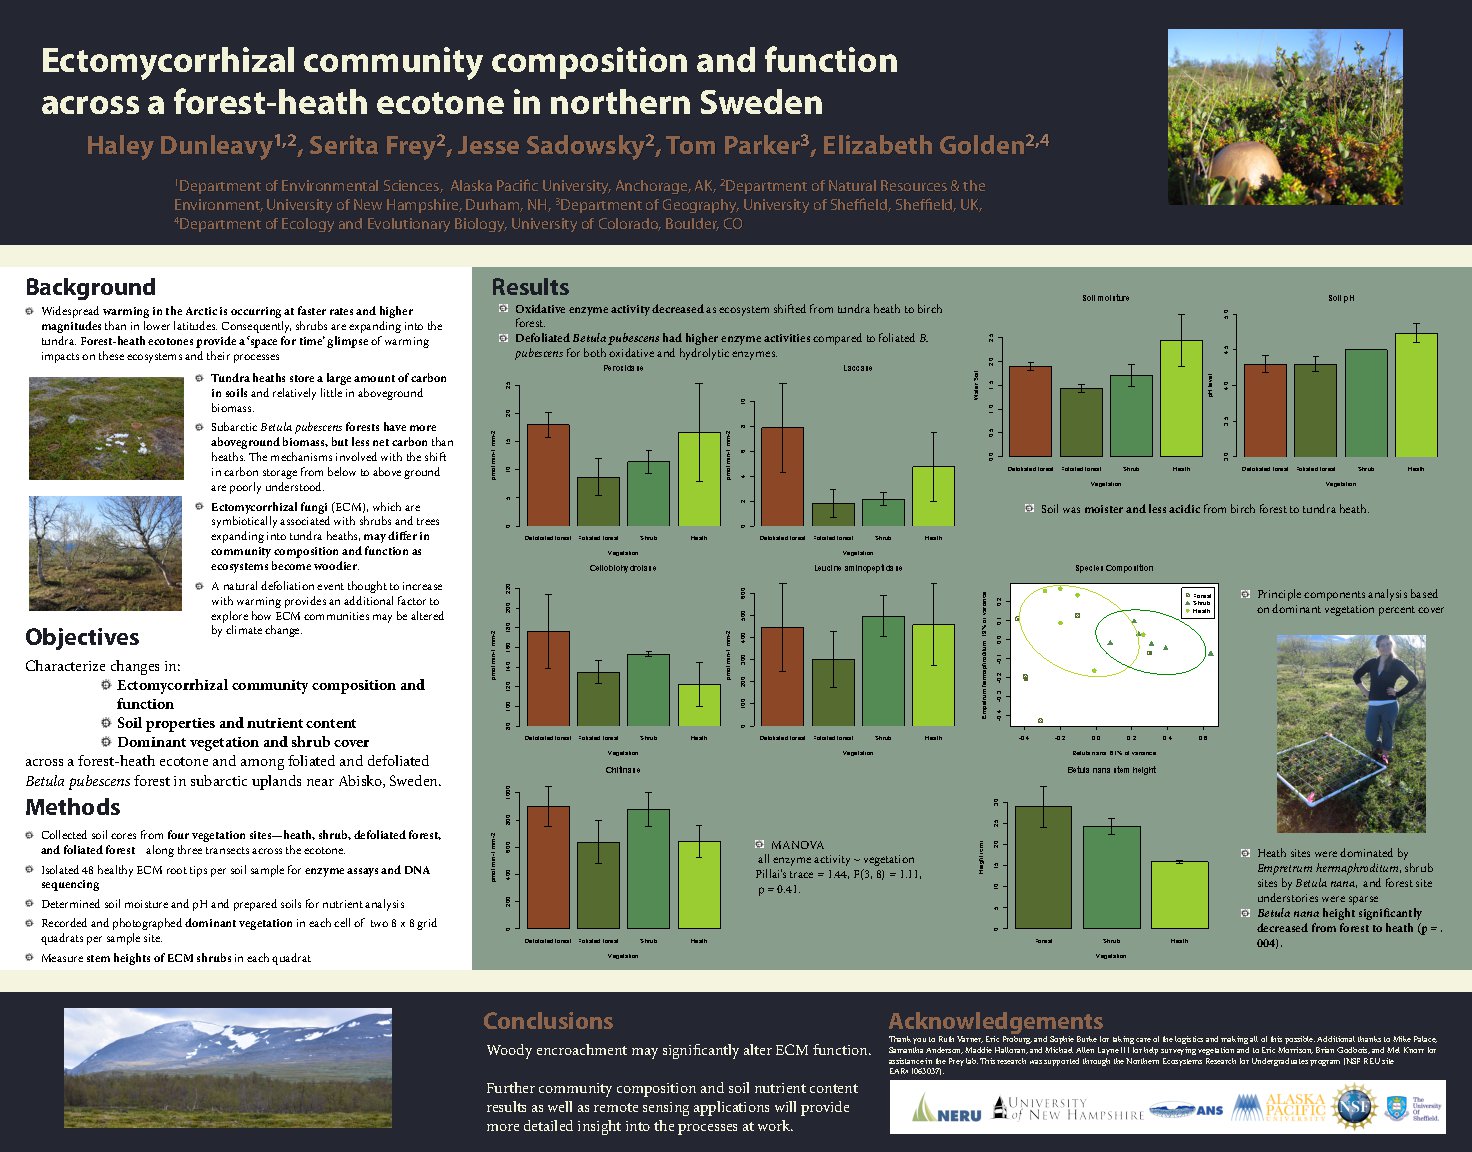 Ectomycorrhizal Community Composition And Function Across A Forest-Heath Ecotone In Northern Sweden by hdunleavy